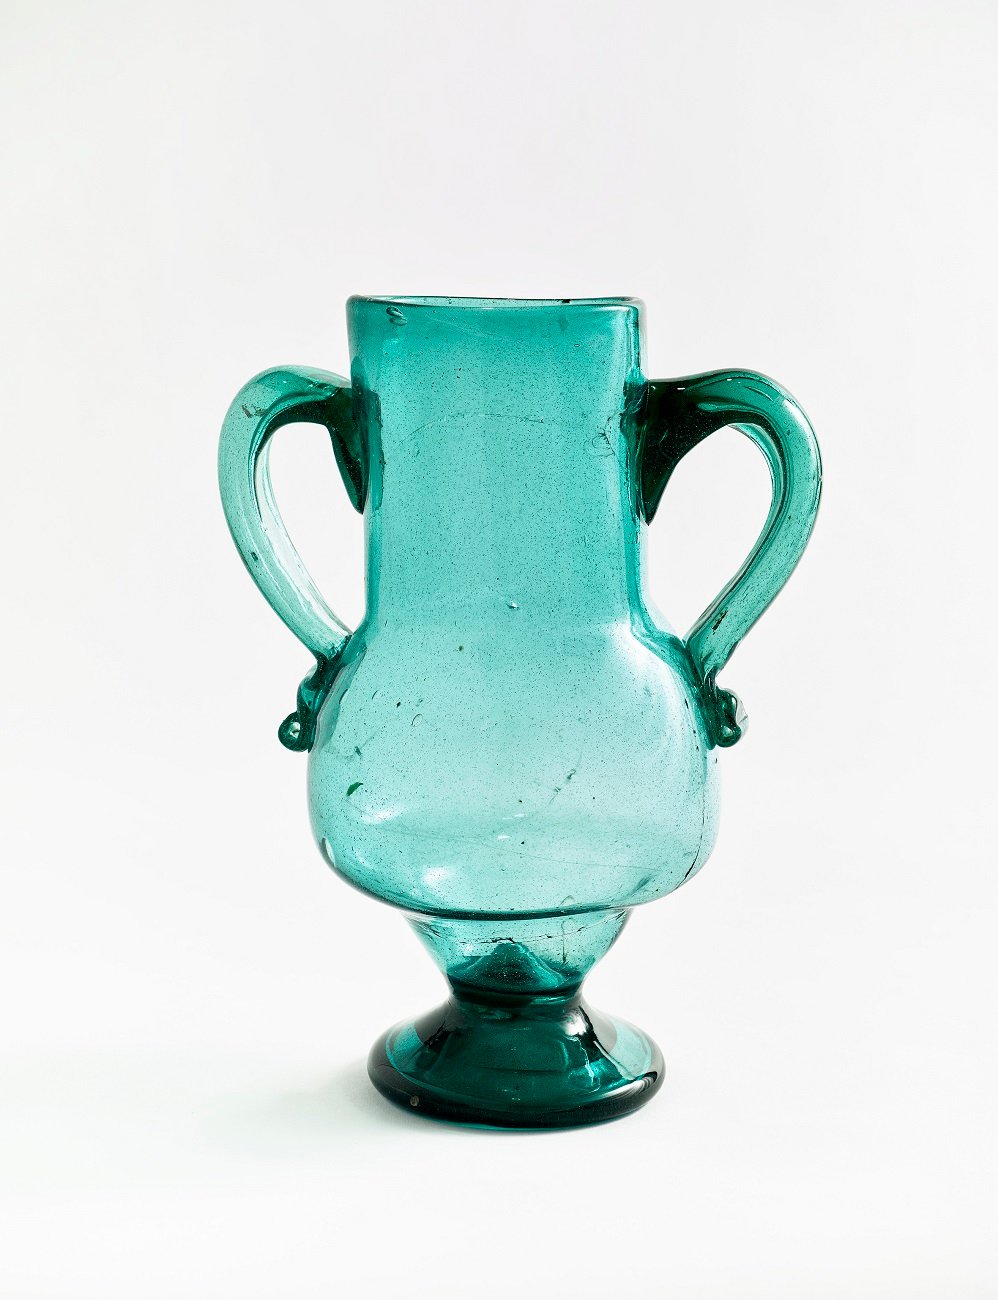 Vase, blown glass, from Andalusia, Spain. Ancienne collection Henri Matisse (Former collection of Henri Matisse) *Musée Matisse, Nice. Bequest of Madame Henri Matisse, 1960. *Photograph by François Fernandez *Courtesy, Musée Matisse / Museum of Fine Arts, Boston